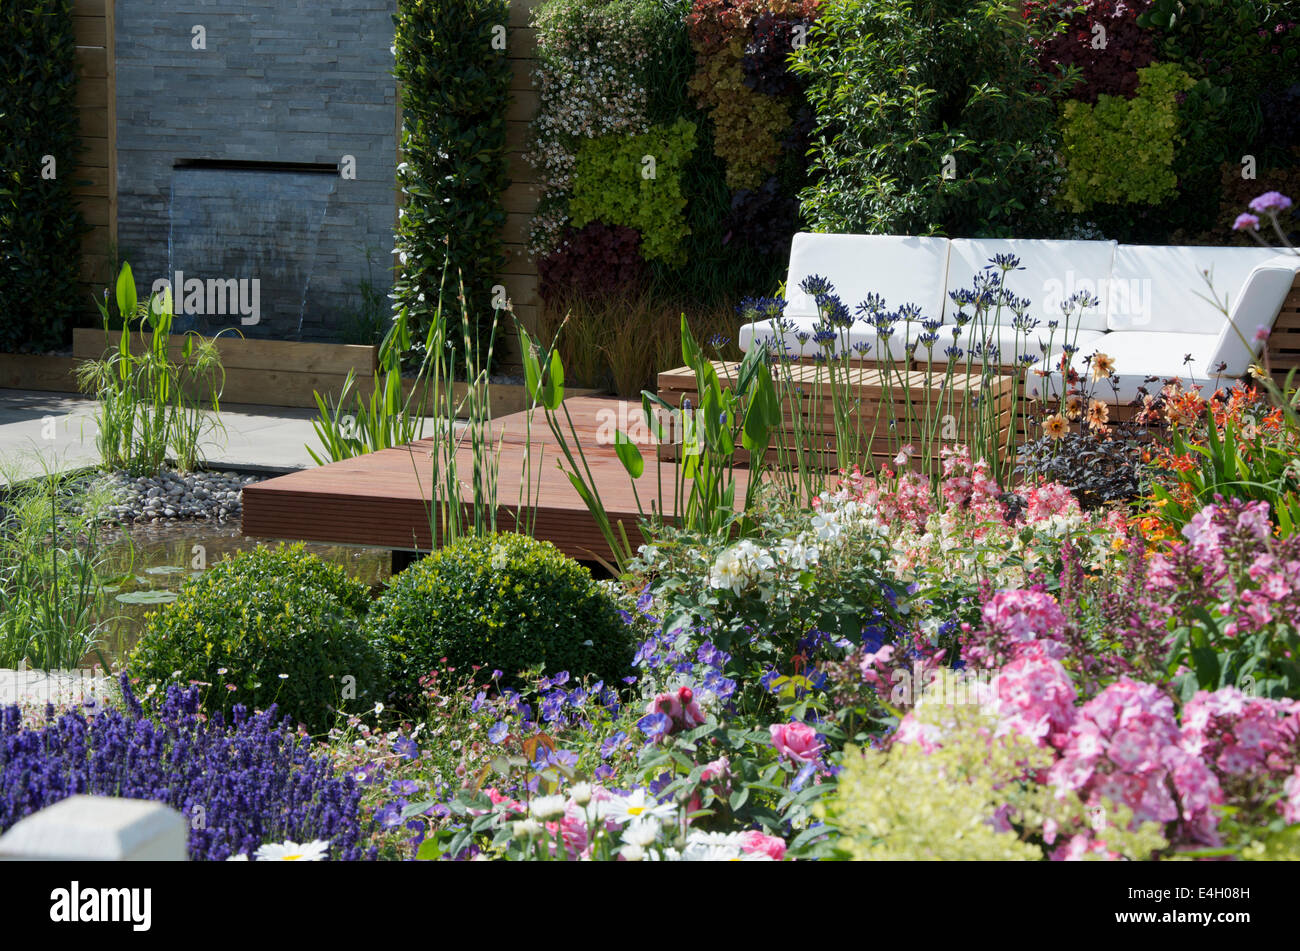 Seating area and water features in A Hampton Garden at RHS Hampton Court Palace Flower Show 2014. Stock Photo